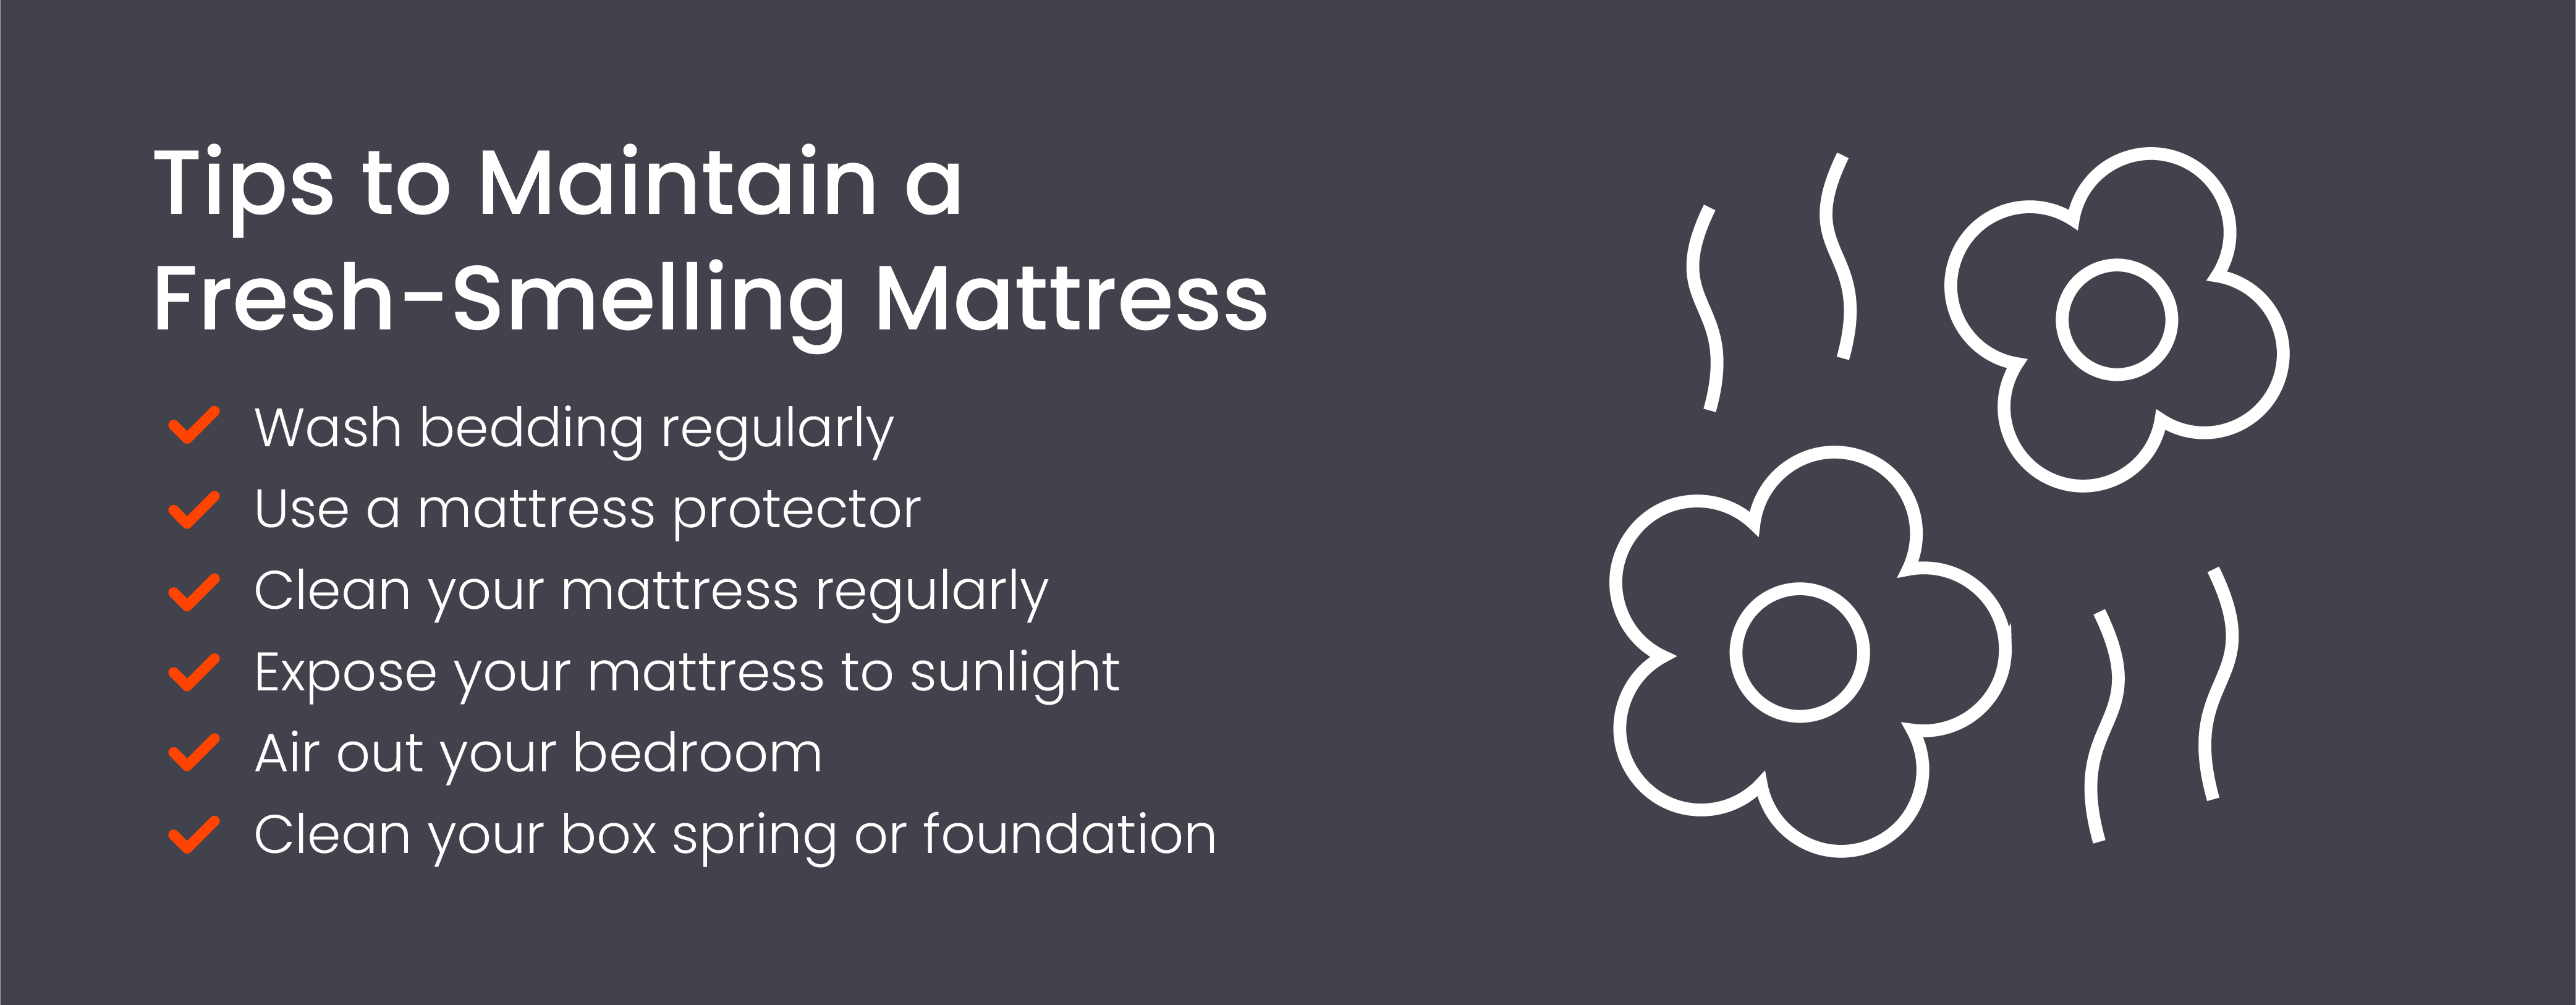 Tips to maintain a fresh-smelling mattress